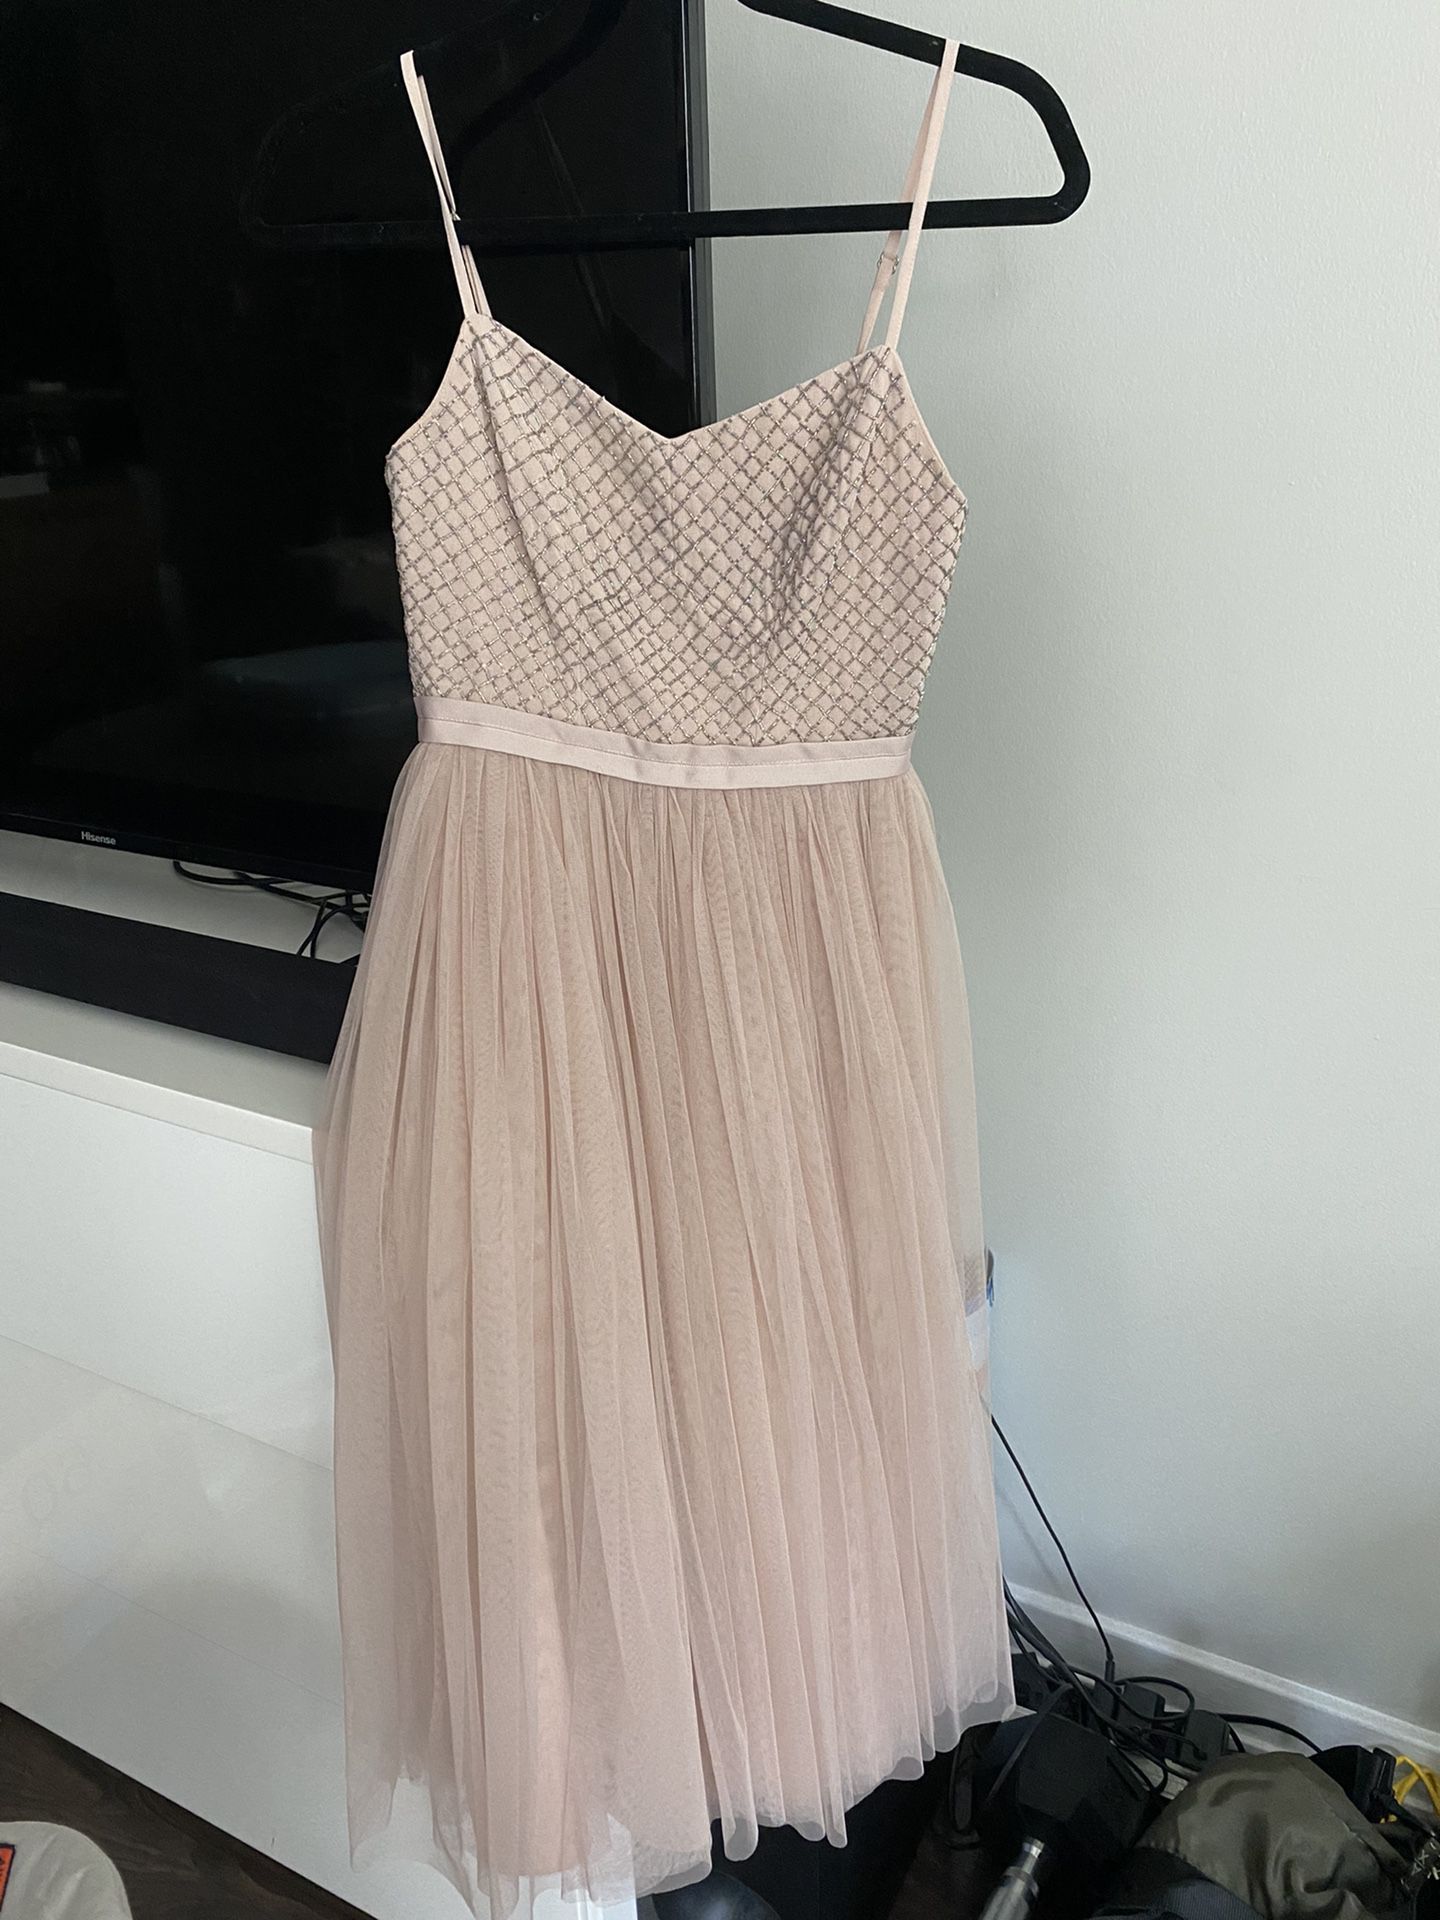 Blush Sequin Tulle Dress, XS, Free People